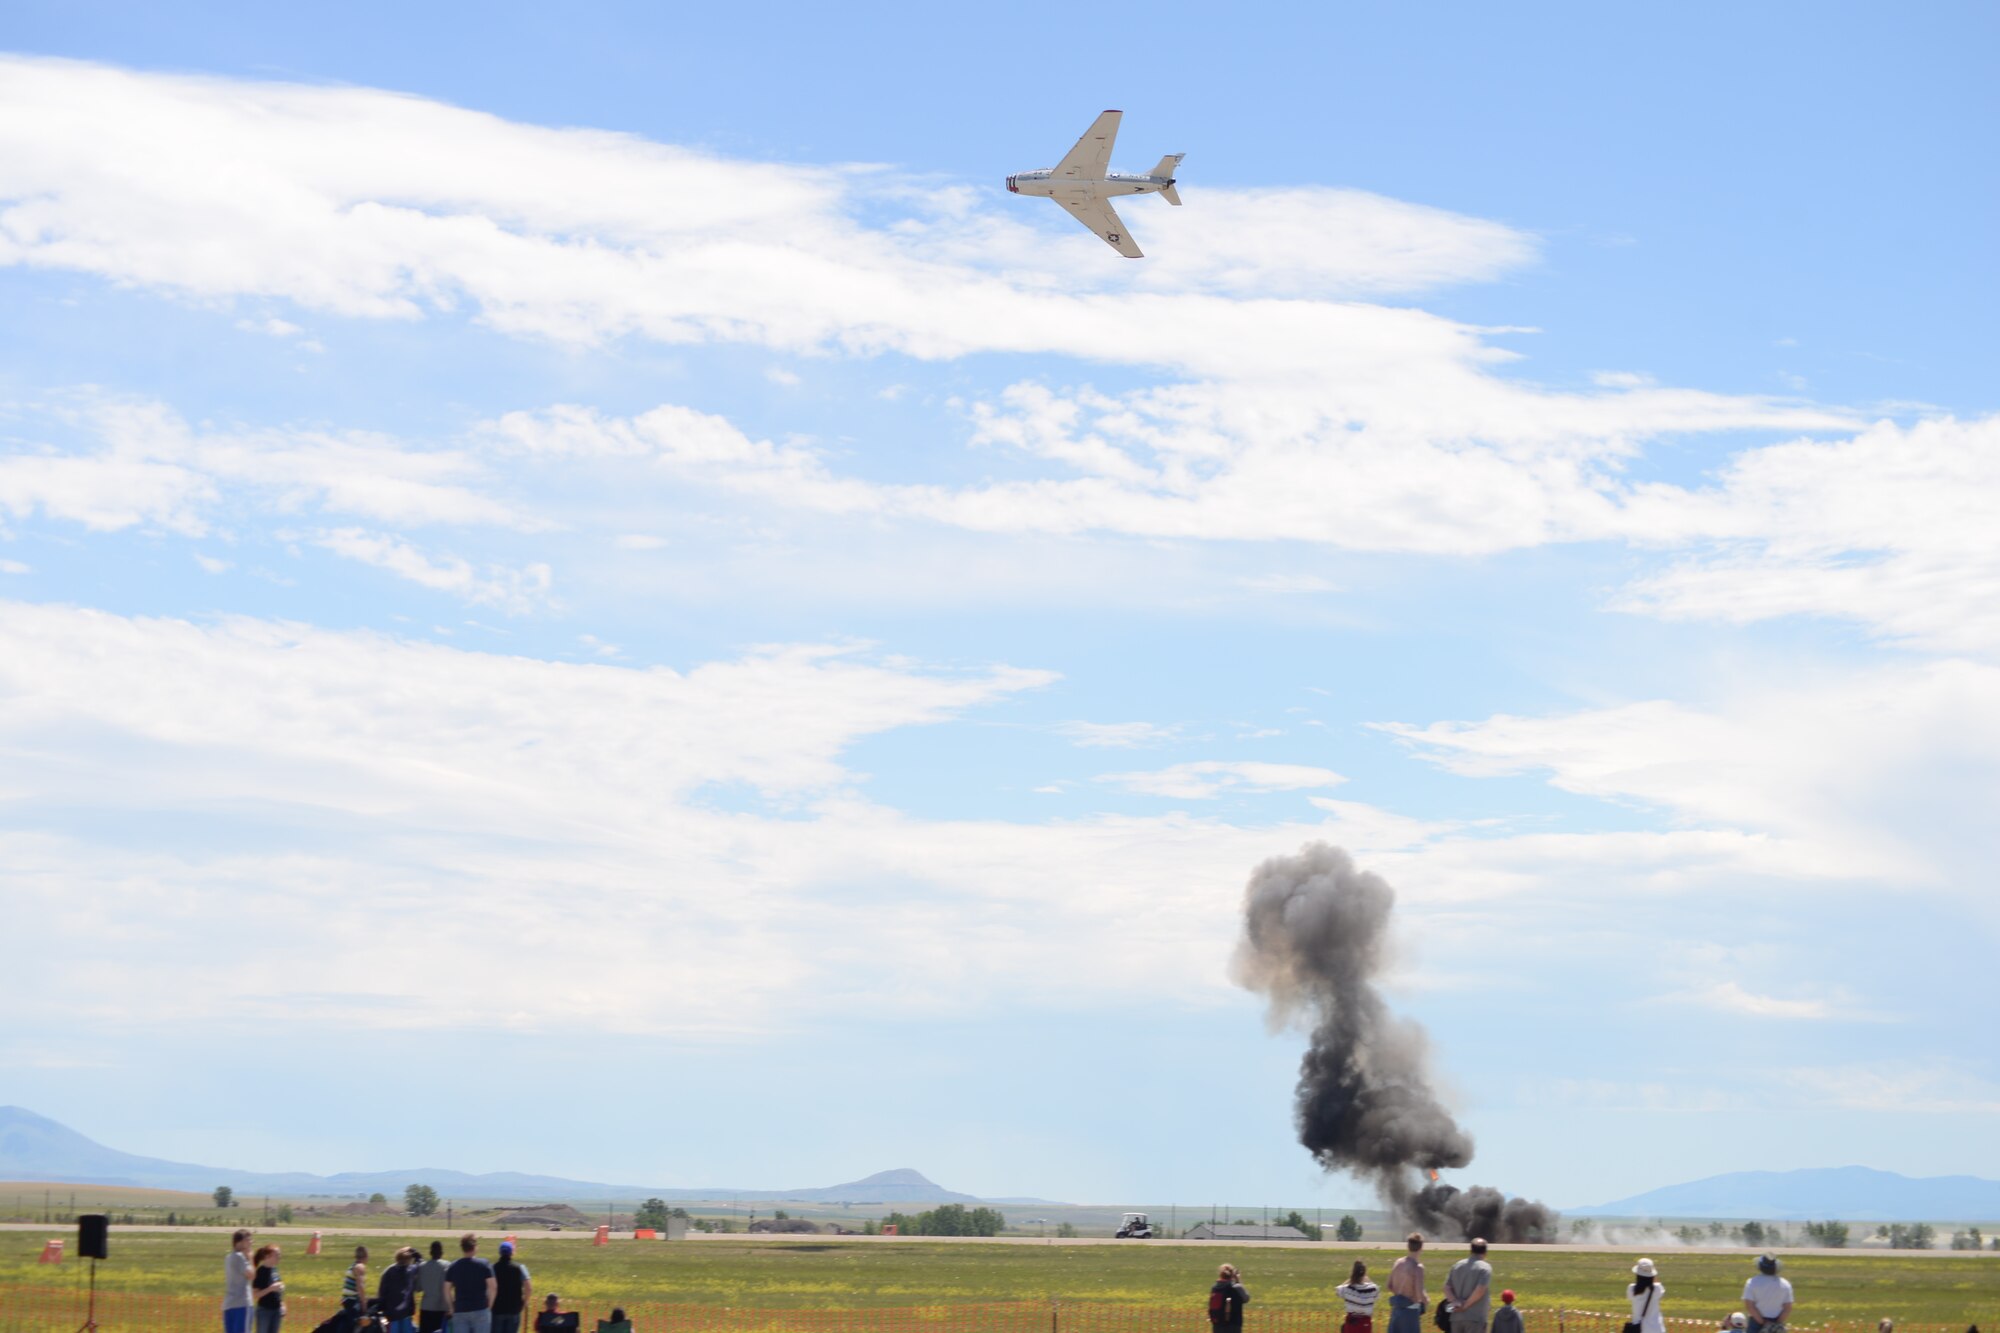 The MiG Fury Fighters perform a mock-up dogfight show July 14, 2019, the “Mission Over Malmstrom” open house event on Malmstrom Air Force Base, Mont.